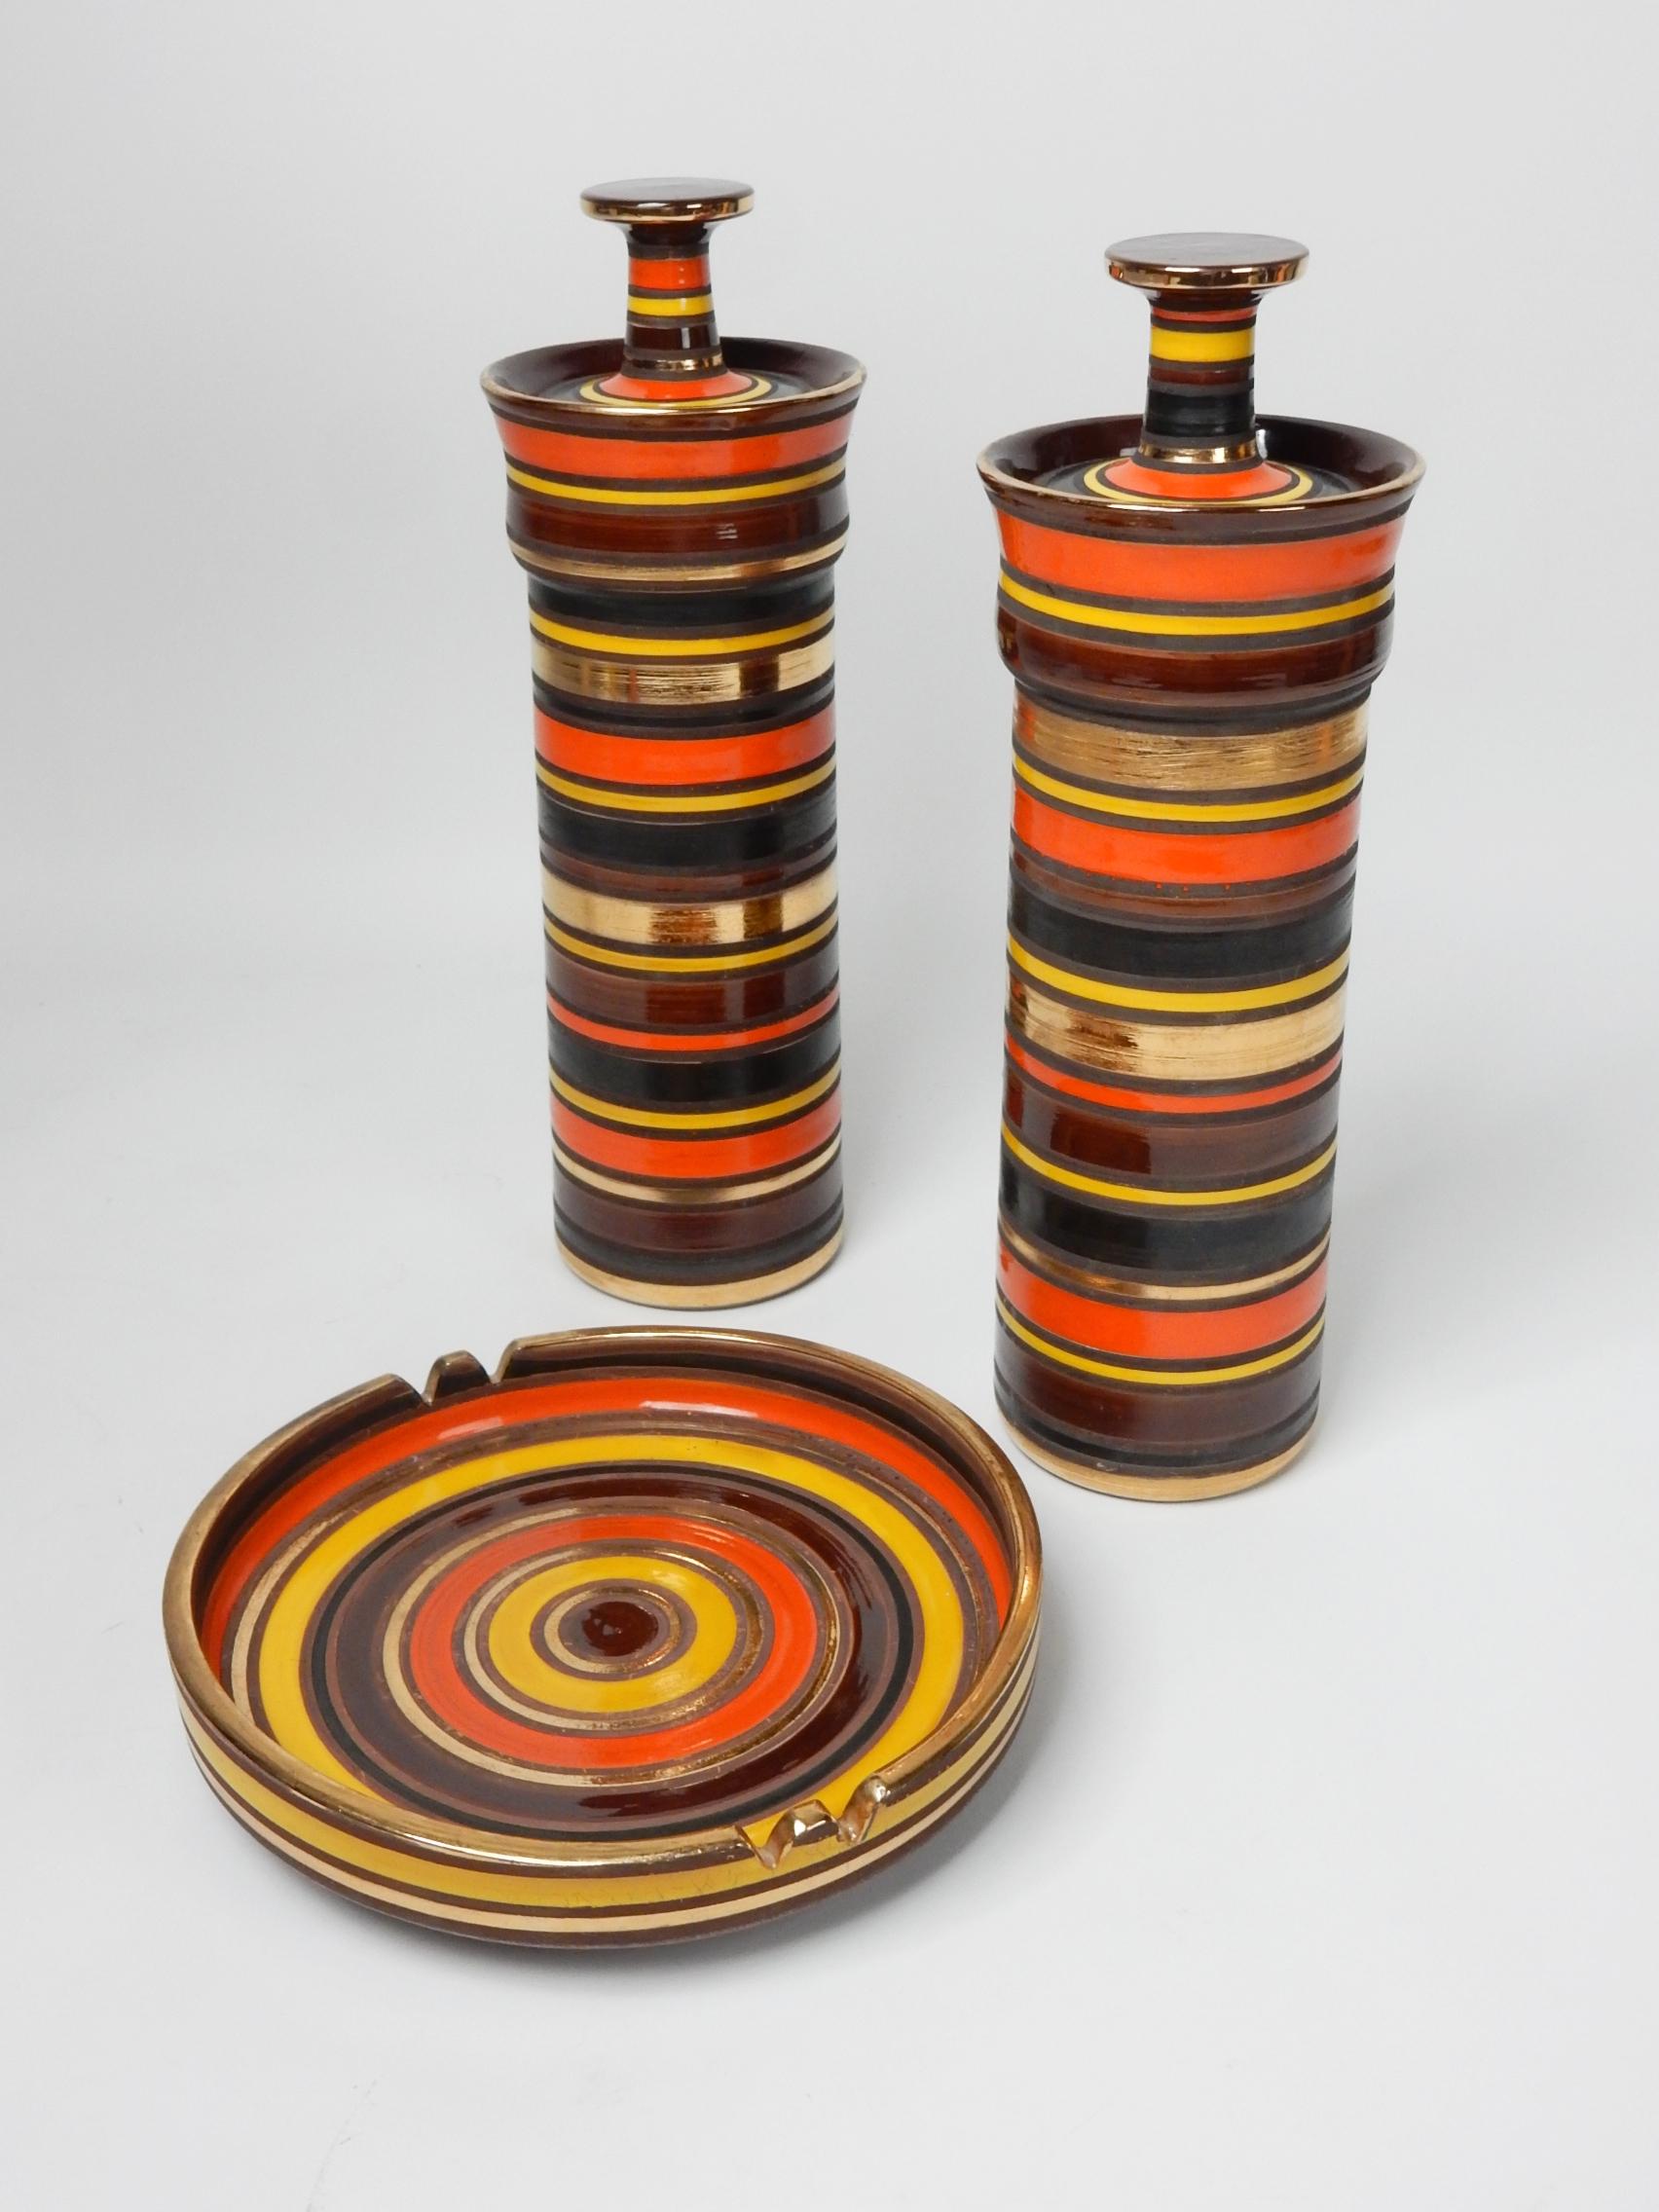 Incredible set by Aldo Londi for Raymor Italy 1950's.
A large pair of lidded jars standing 16 inches tall x 5-1/2 wide.
Large ashtray is 10-1/2 inches wide x 2 inch tall sides.
Bright bold colored glaze bands of orange, yellow, gold black and